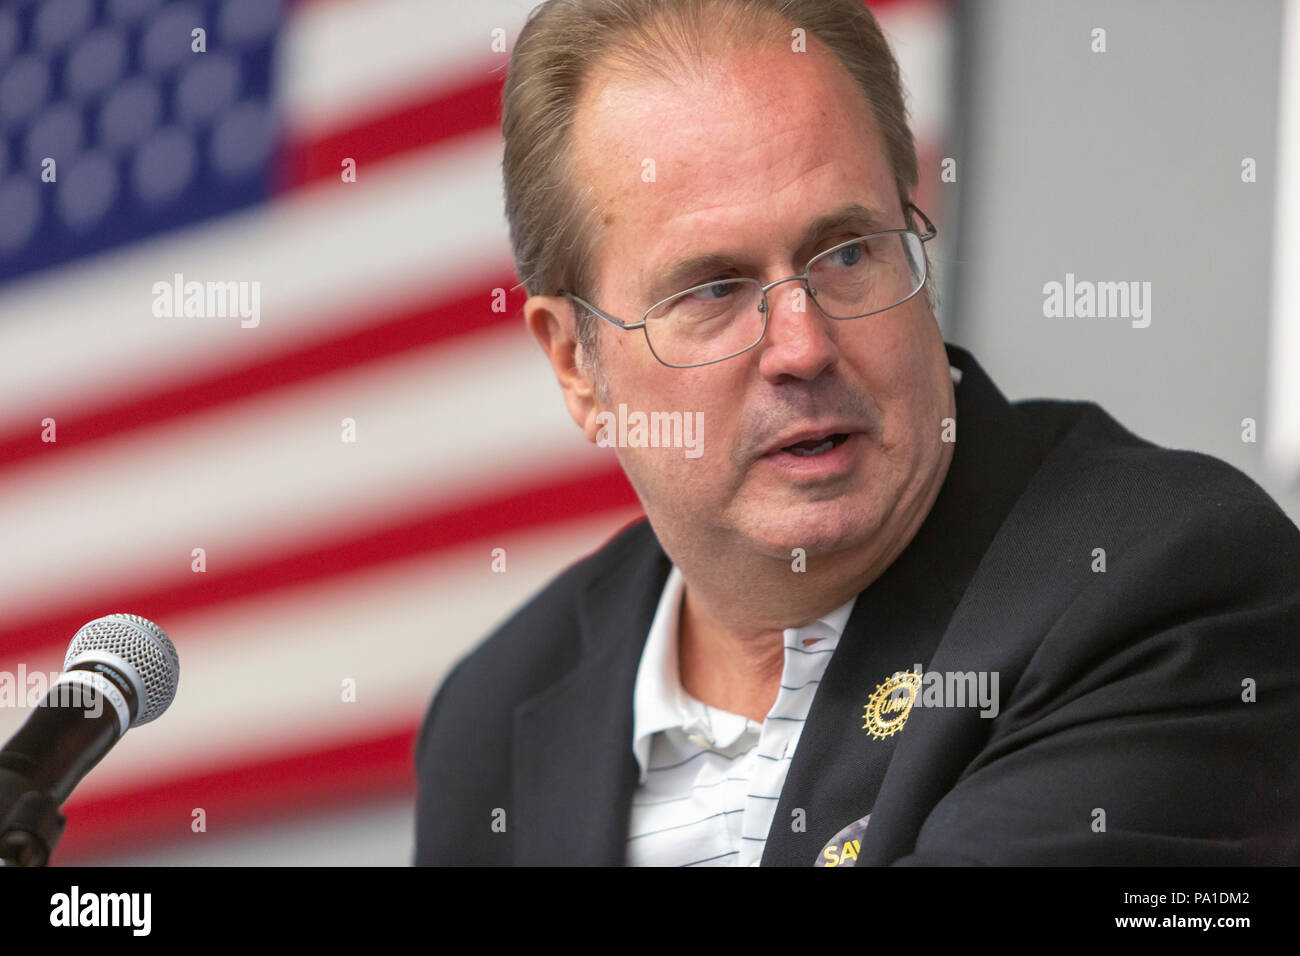 Detroit, Michigan USA - 20 July 2018 - United Auto Workers President Gary Jones speaks as union members rally to save their pensions. More than 300 multiemployer pension plans across the country are in financial difficulty. The unions want Congress to pass the Butch Lewis Act to protect pension benefits. Credit: Jim West/Alamy Live News Stock Photo